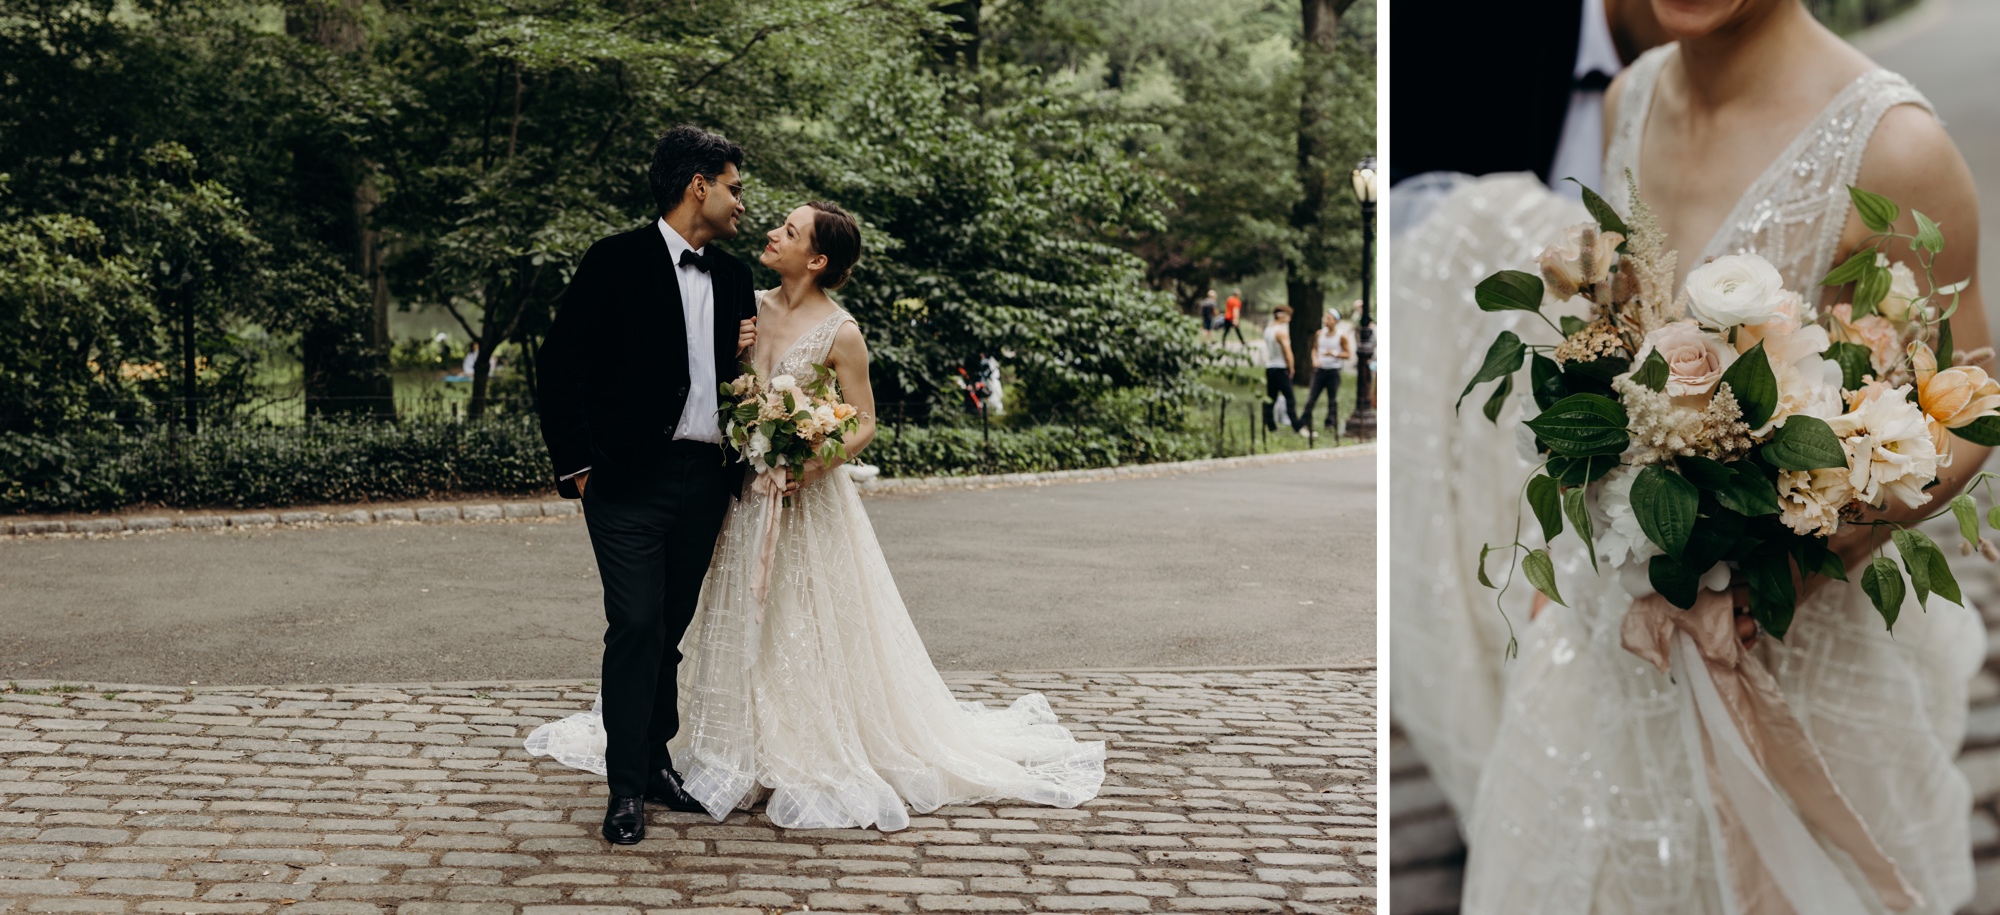 portrait of a bride and groom on their wedding day in central park, new york city